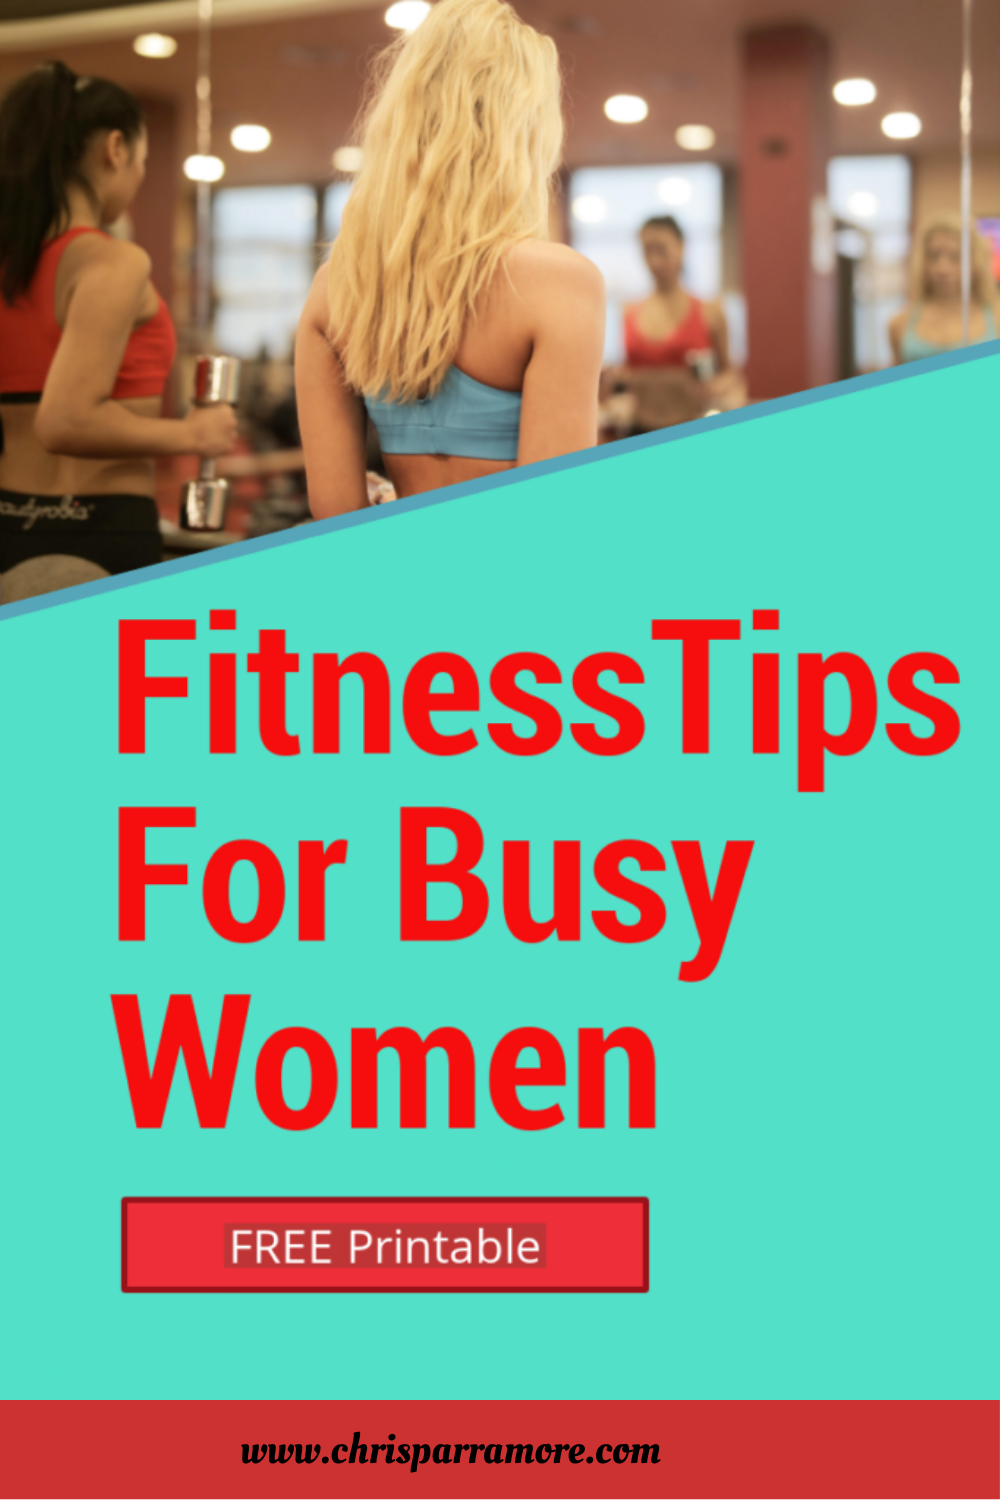 Healthy Lifestyle Tips  Fitness Tips & Wellness for Busy Women